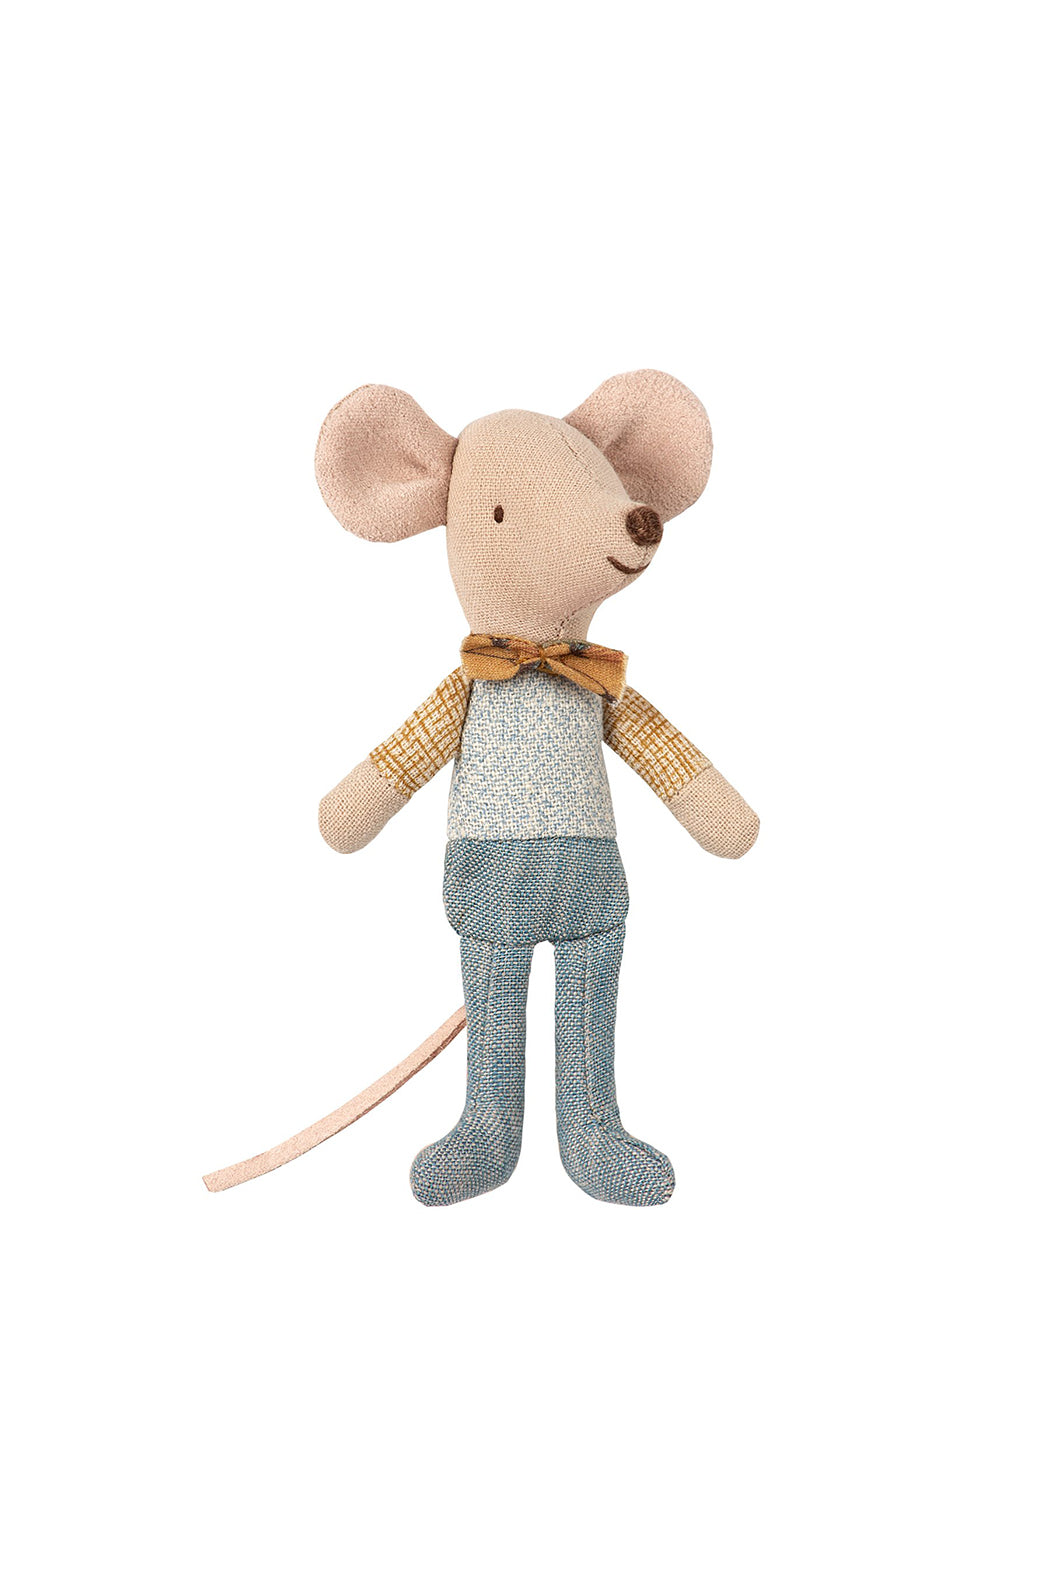 Maileg Mouse Little Brother in Box